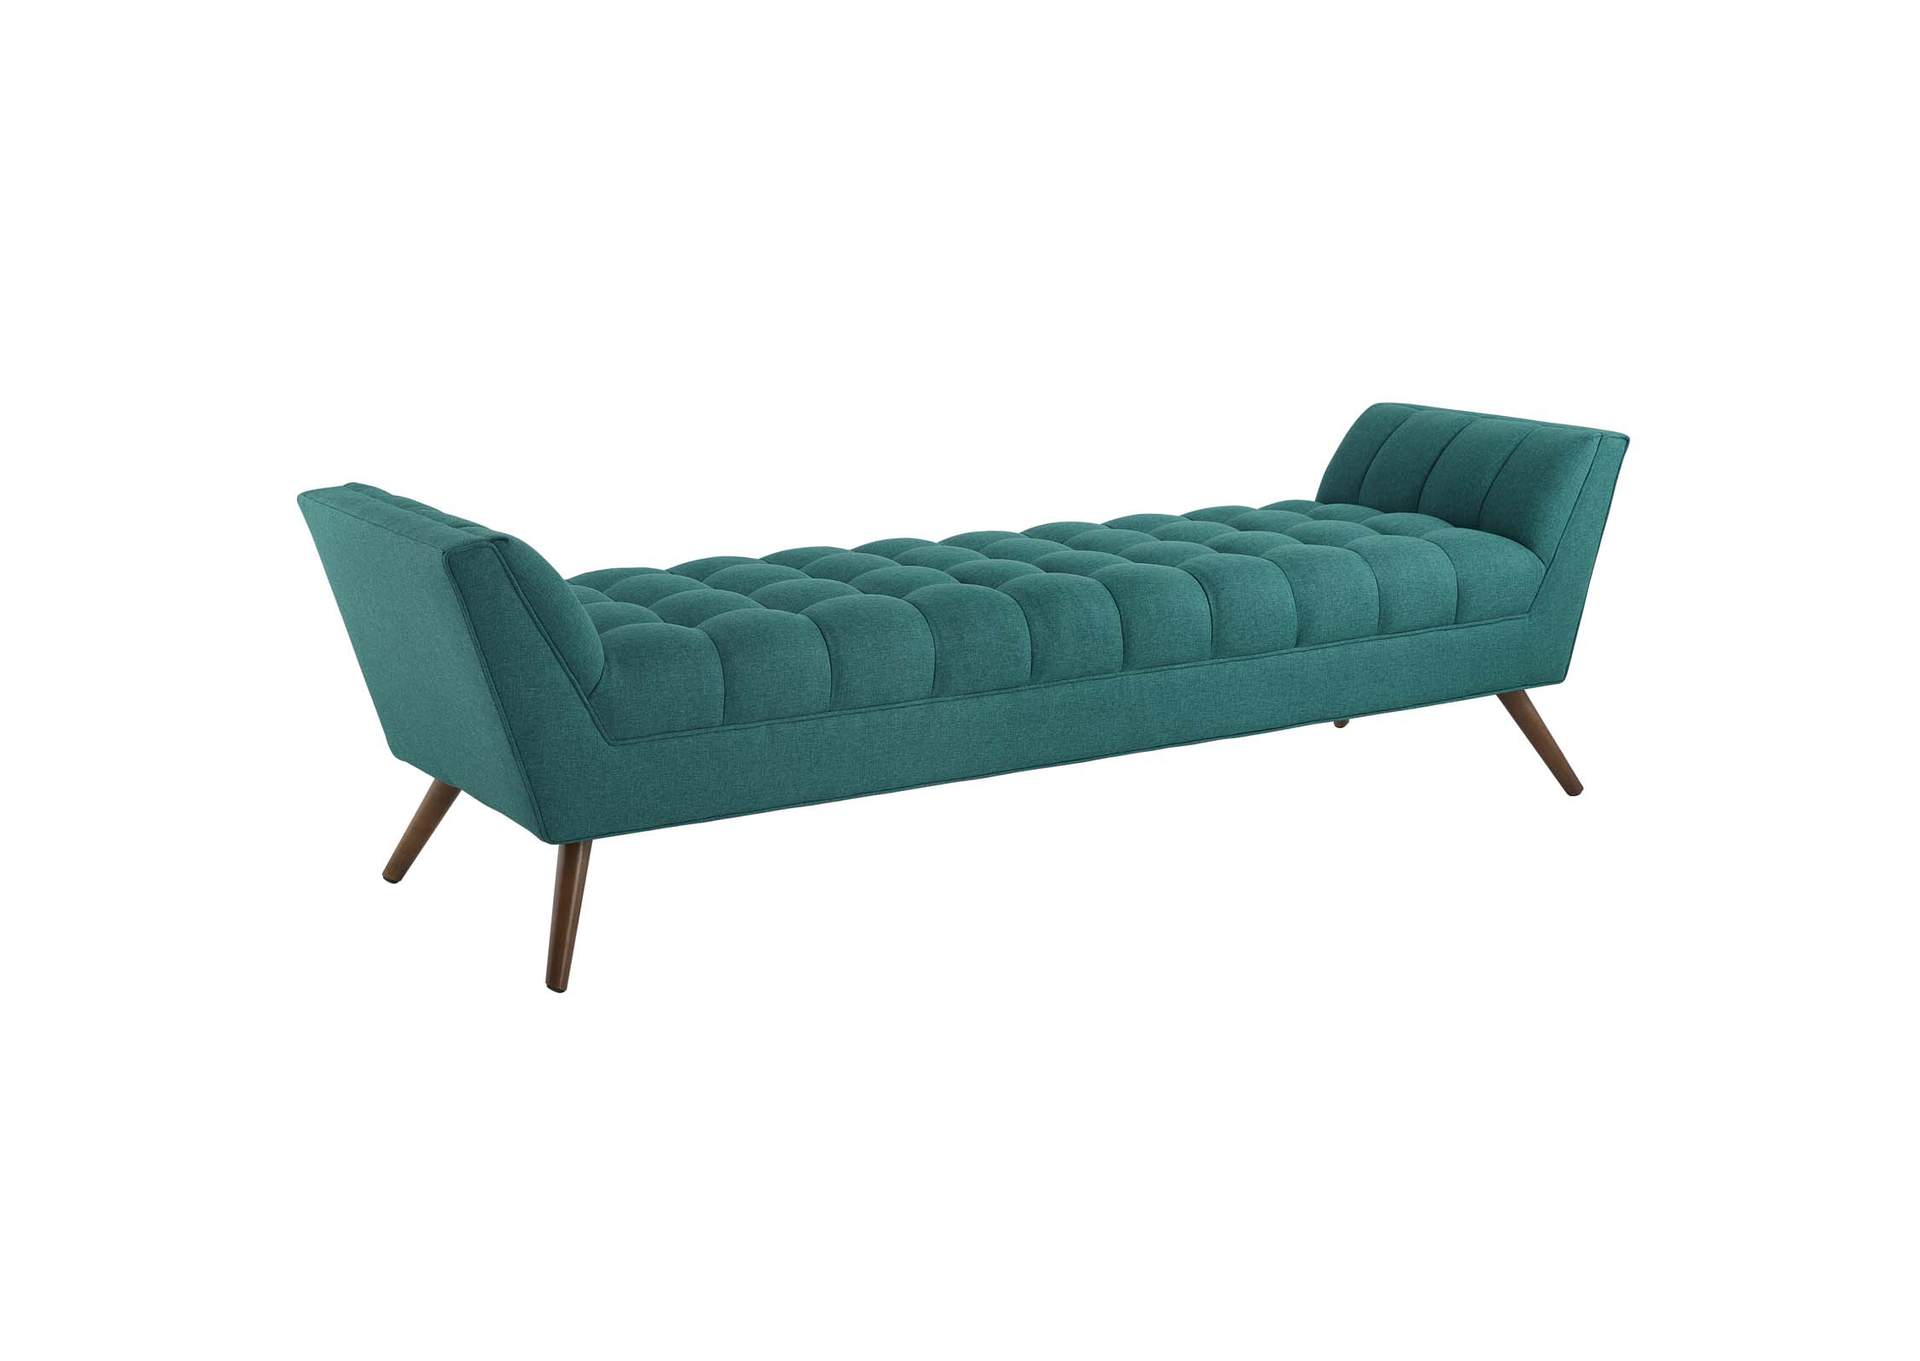 Teal Response Upholstered Fabric Bench,Modway